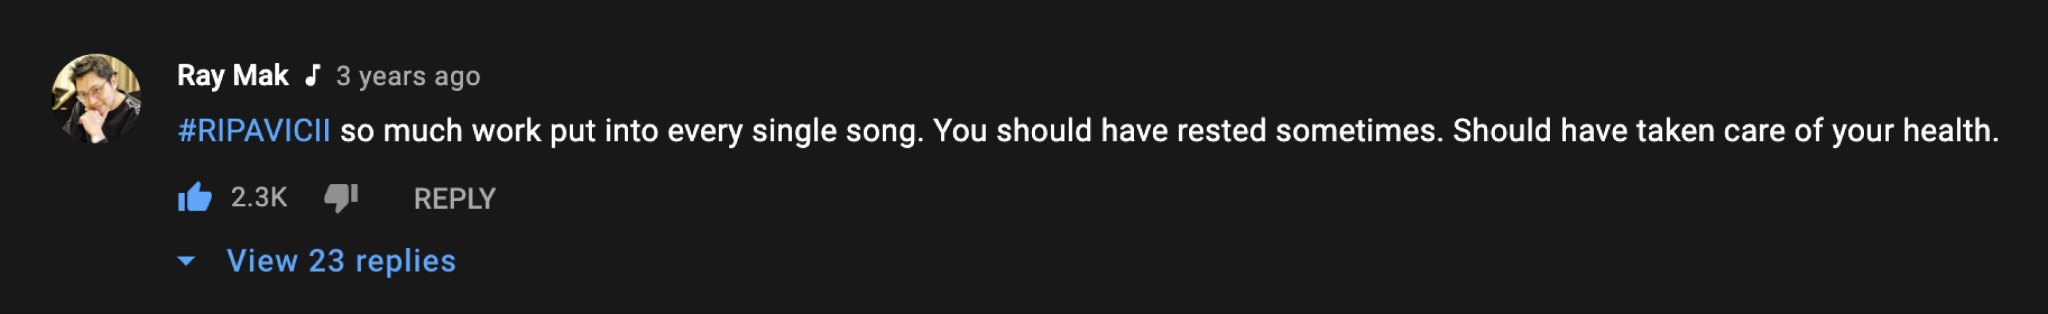 Screenshot of a YouTube comment saying "#RIPAvicii so much work put into every single song. You should have rested sometimes. Should have taken care of your health."